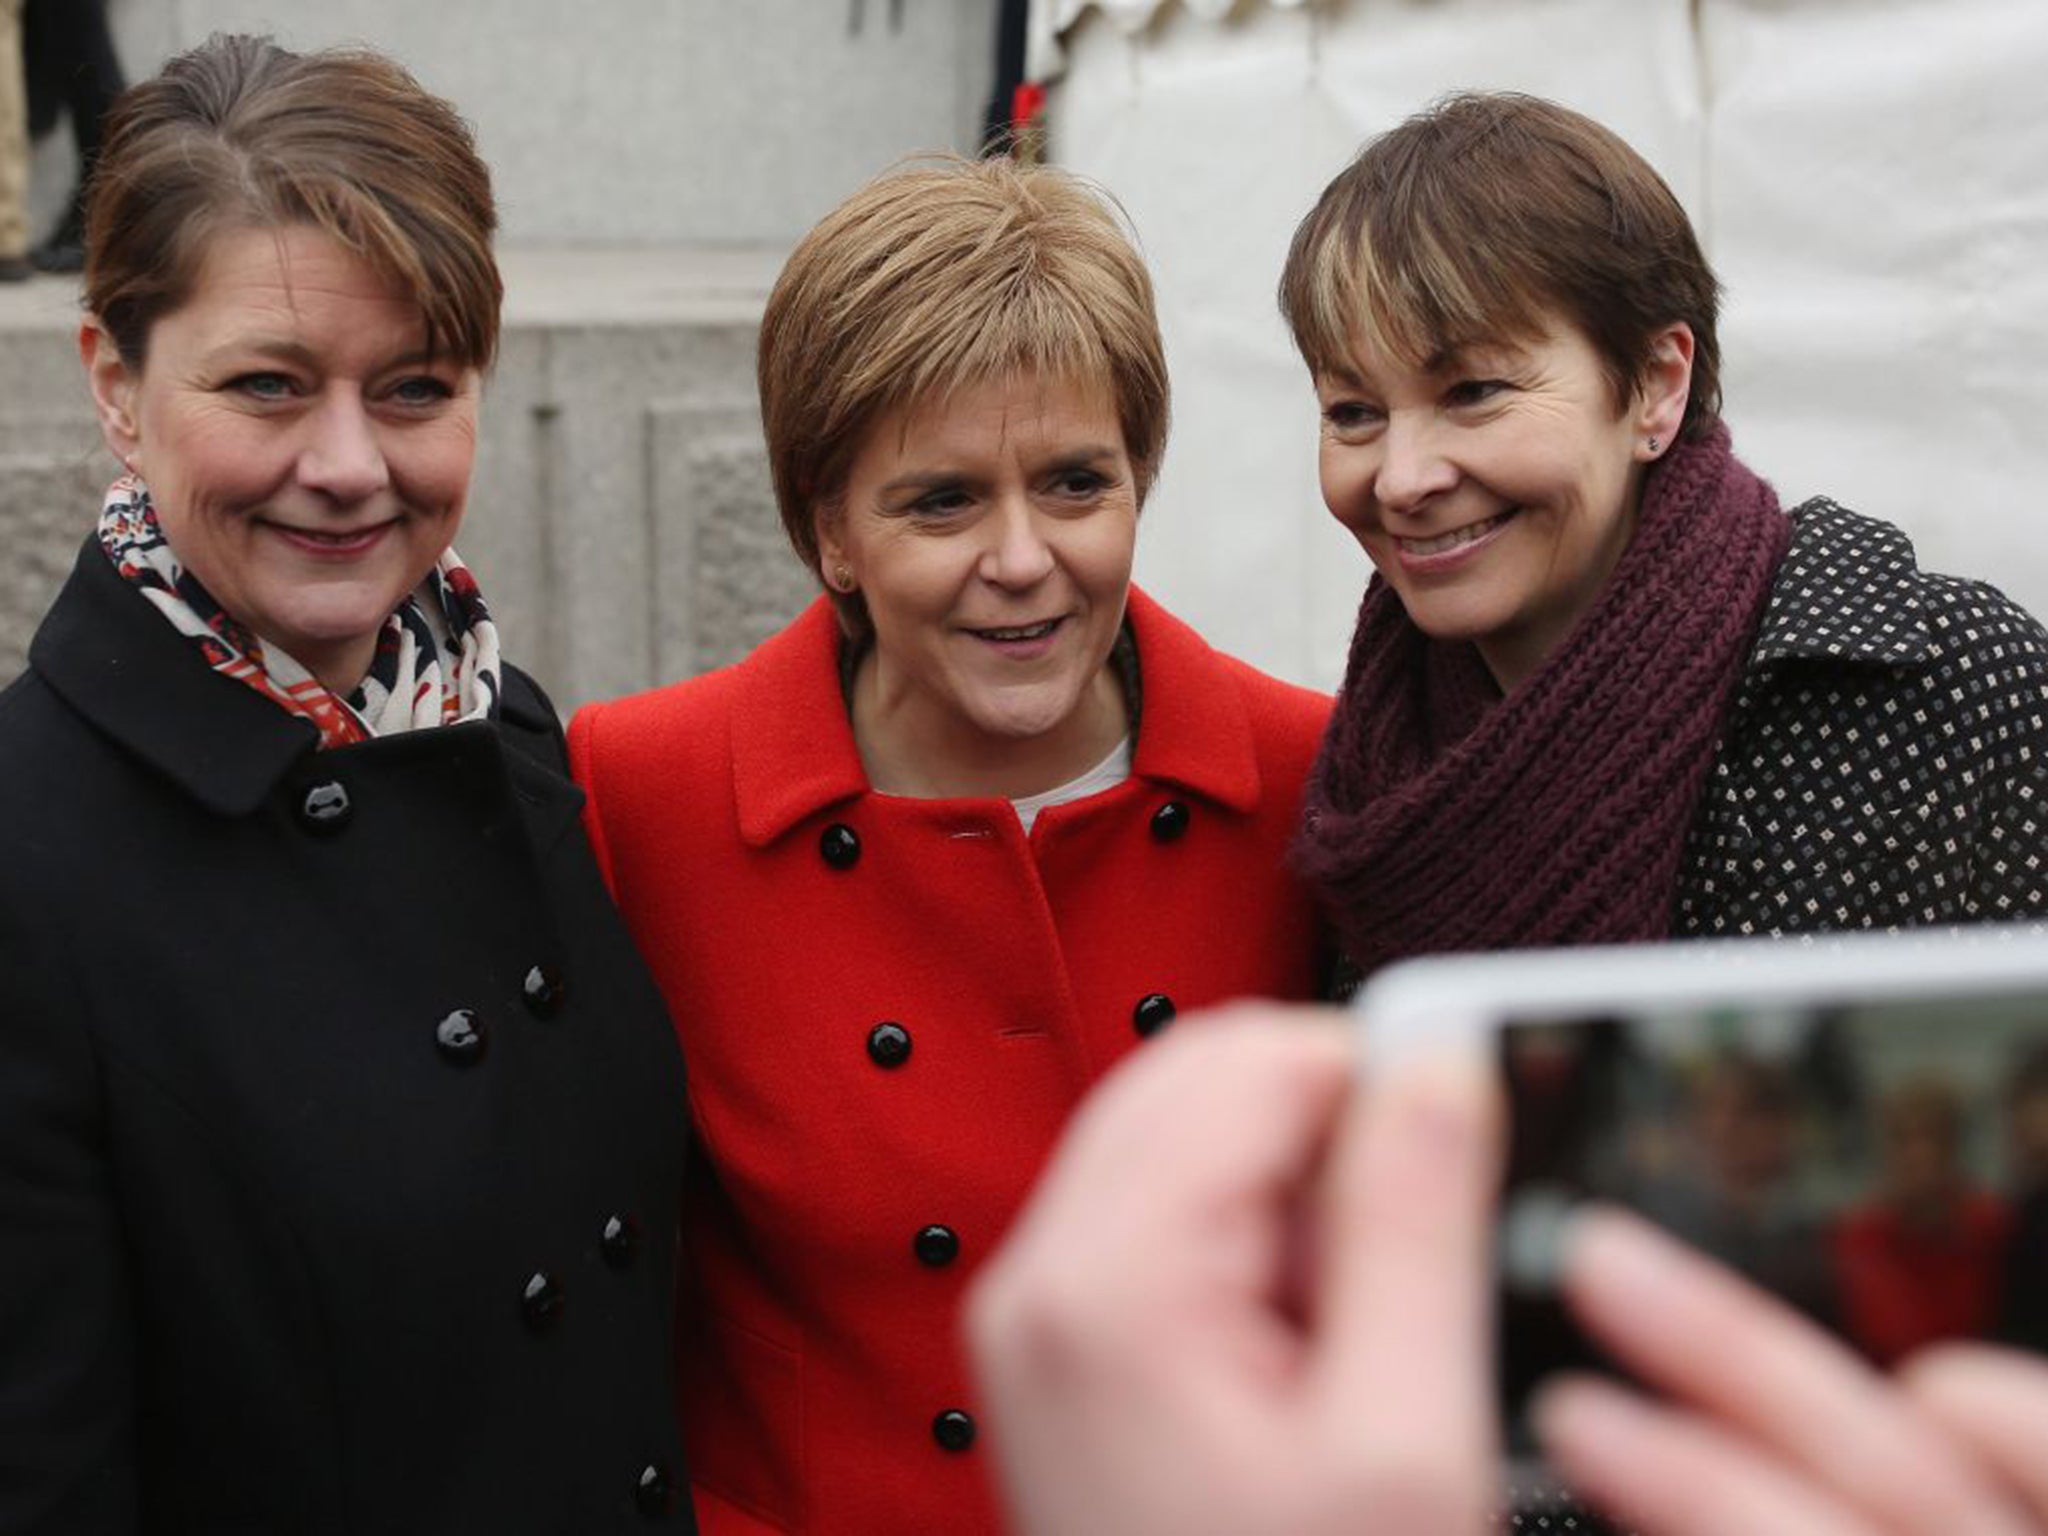 Nicola Sturgeon of the SNP flanked by Leanne Wood of Plaid Cymru, left, and Caroline Lucas of the Green Party